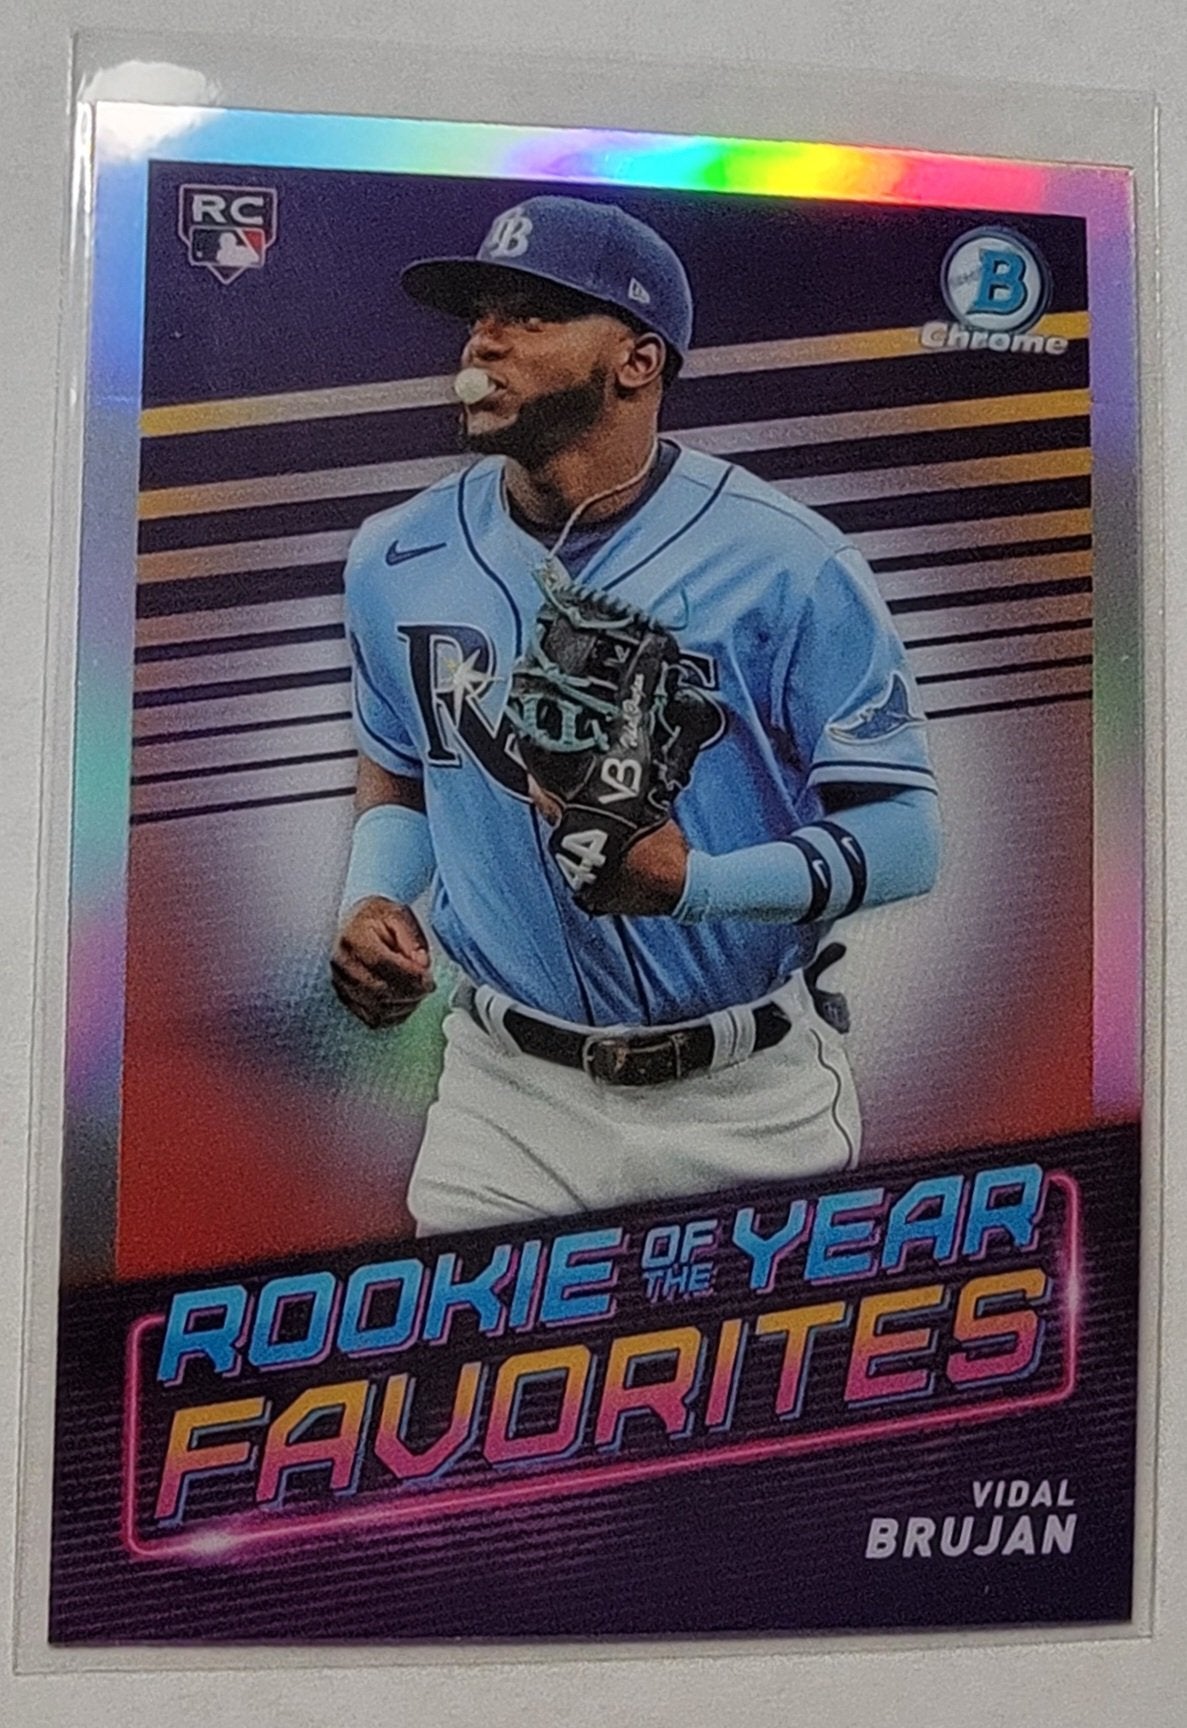 2022 Bowman Chrome Vidal Brujan Mega Box Rookie of the Year Favorites Refractor Baseball Card AVM1 simple Xclusive Collectibles   